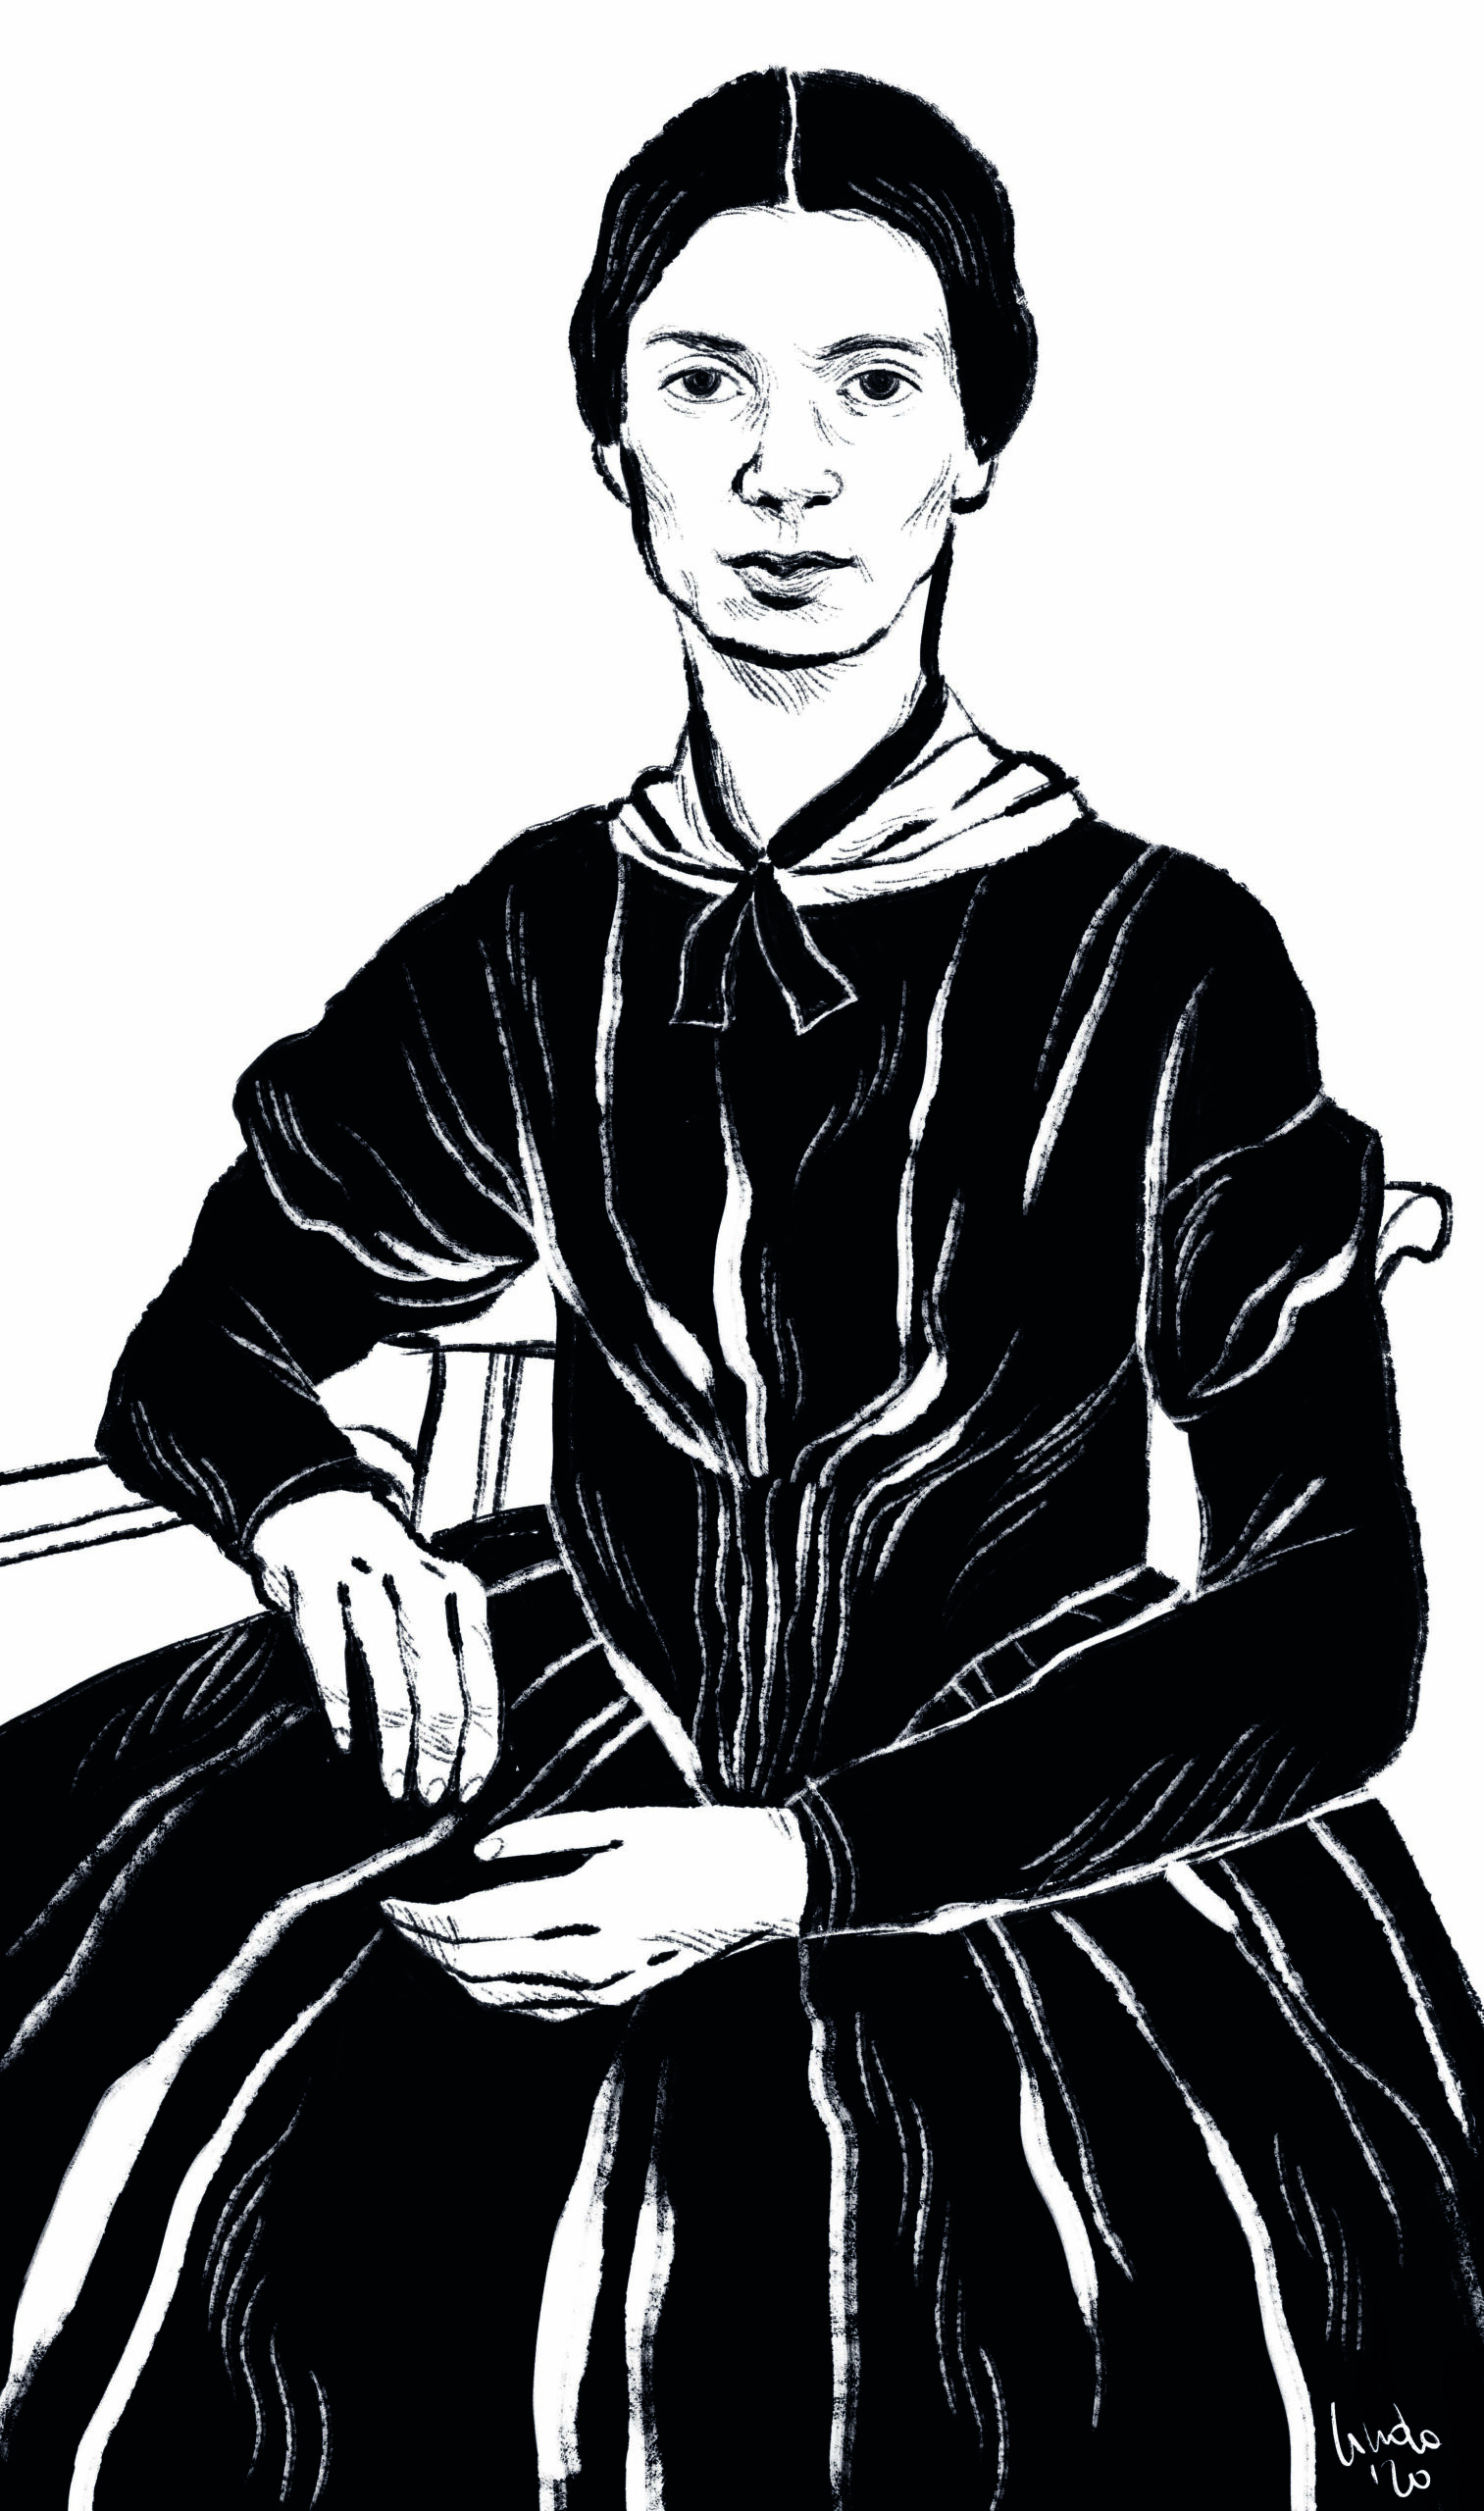 A black ink drawing of Emily Dickinson, in the style of her famous daguerreotype